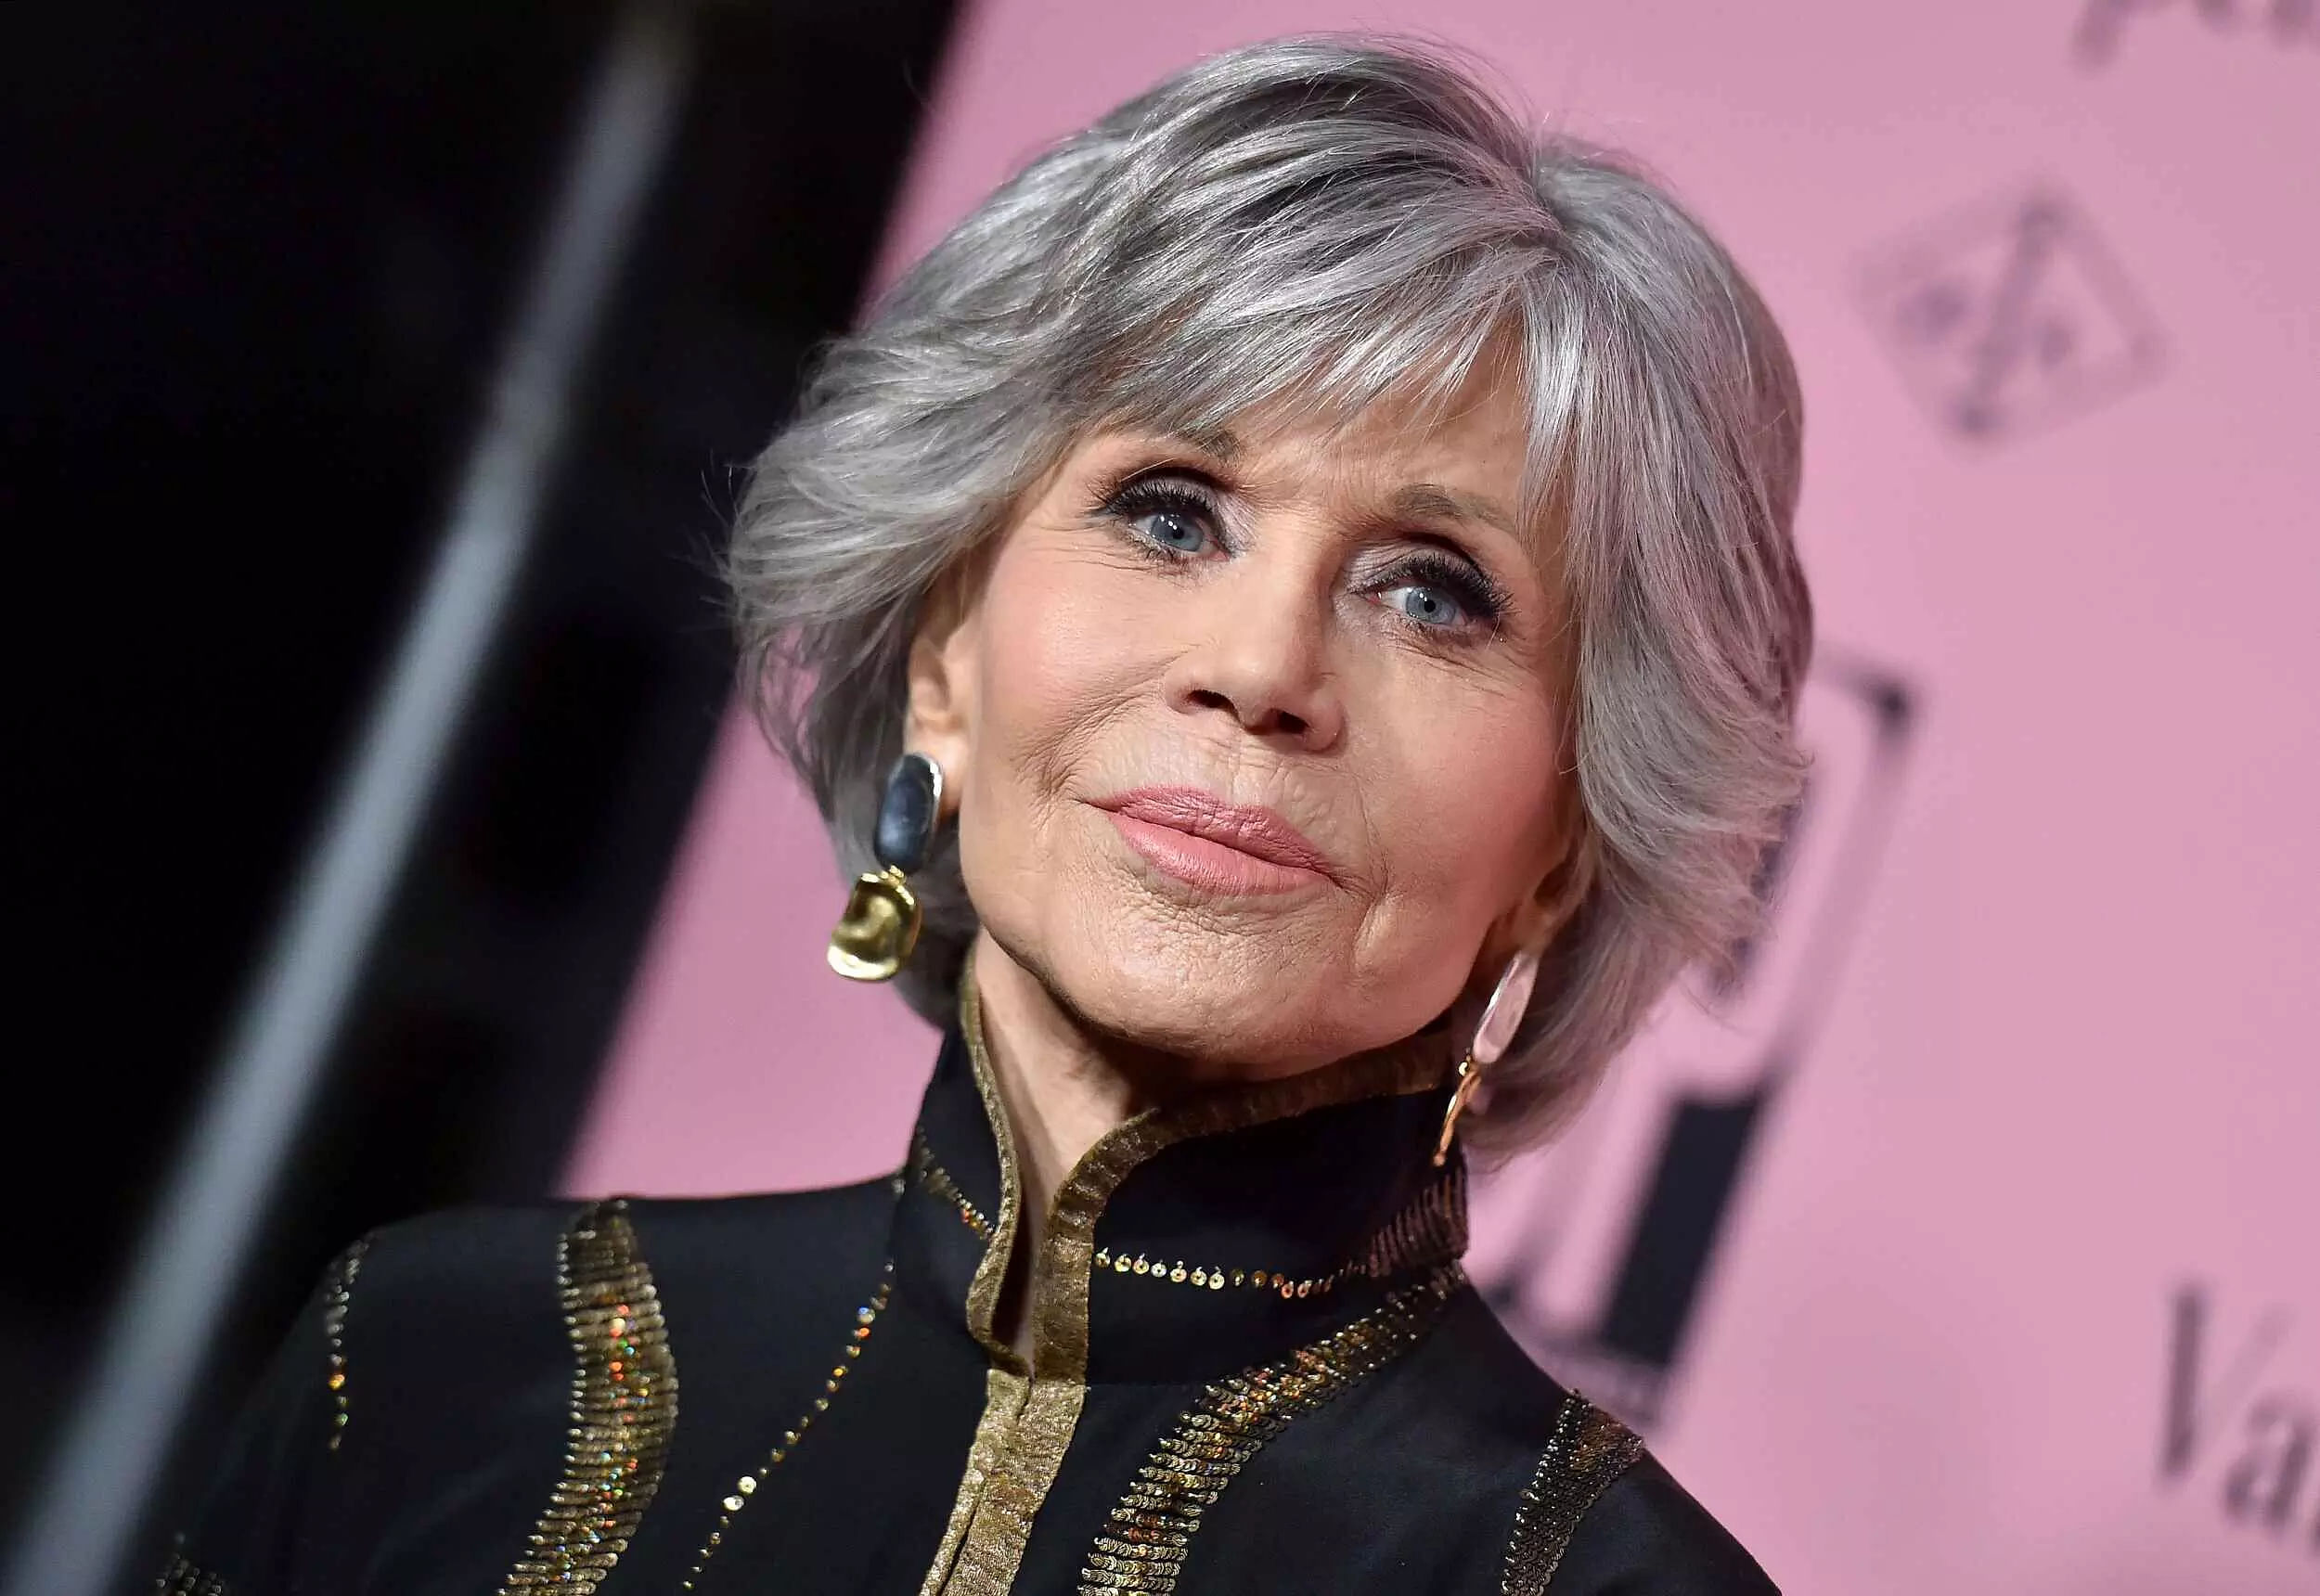 Jane Fonda shares why sex gets better with age for women